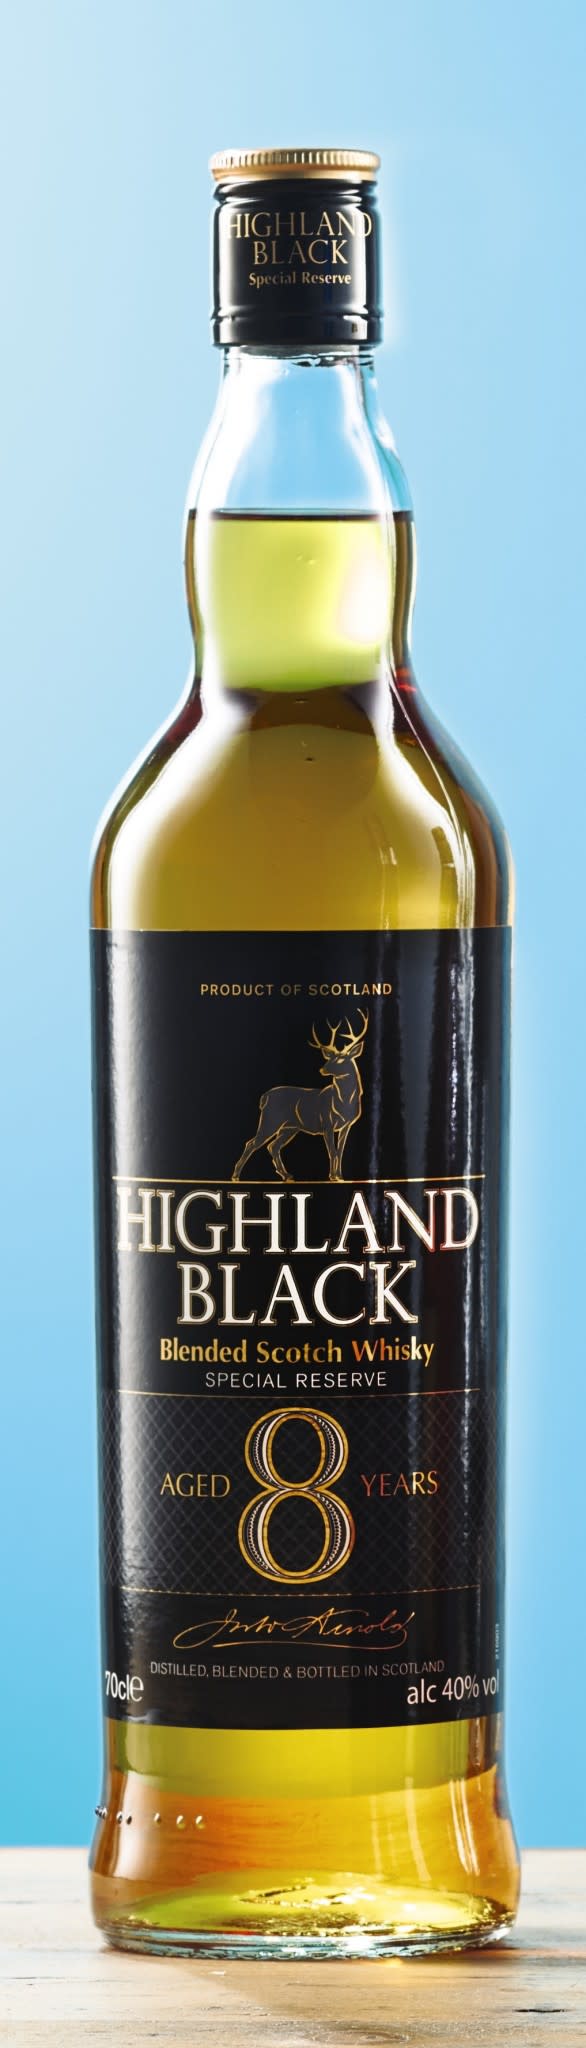 Aldi's Highland Black 8 Year Old Whisky, which sells for just under £13, beat a rival whisky costing £45 (Aldi)